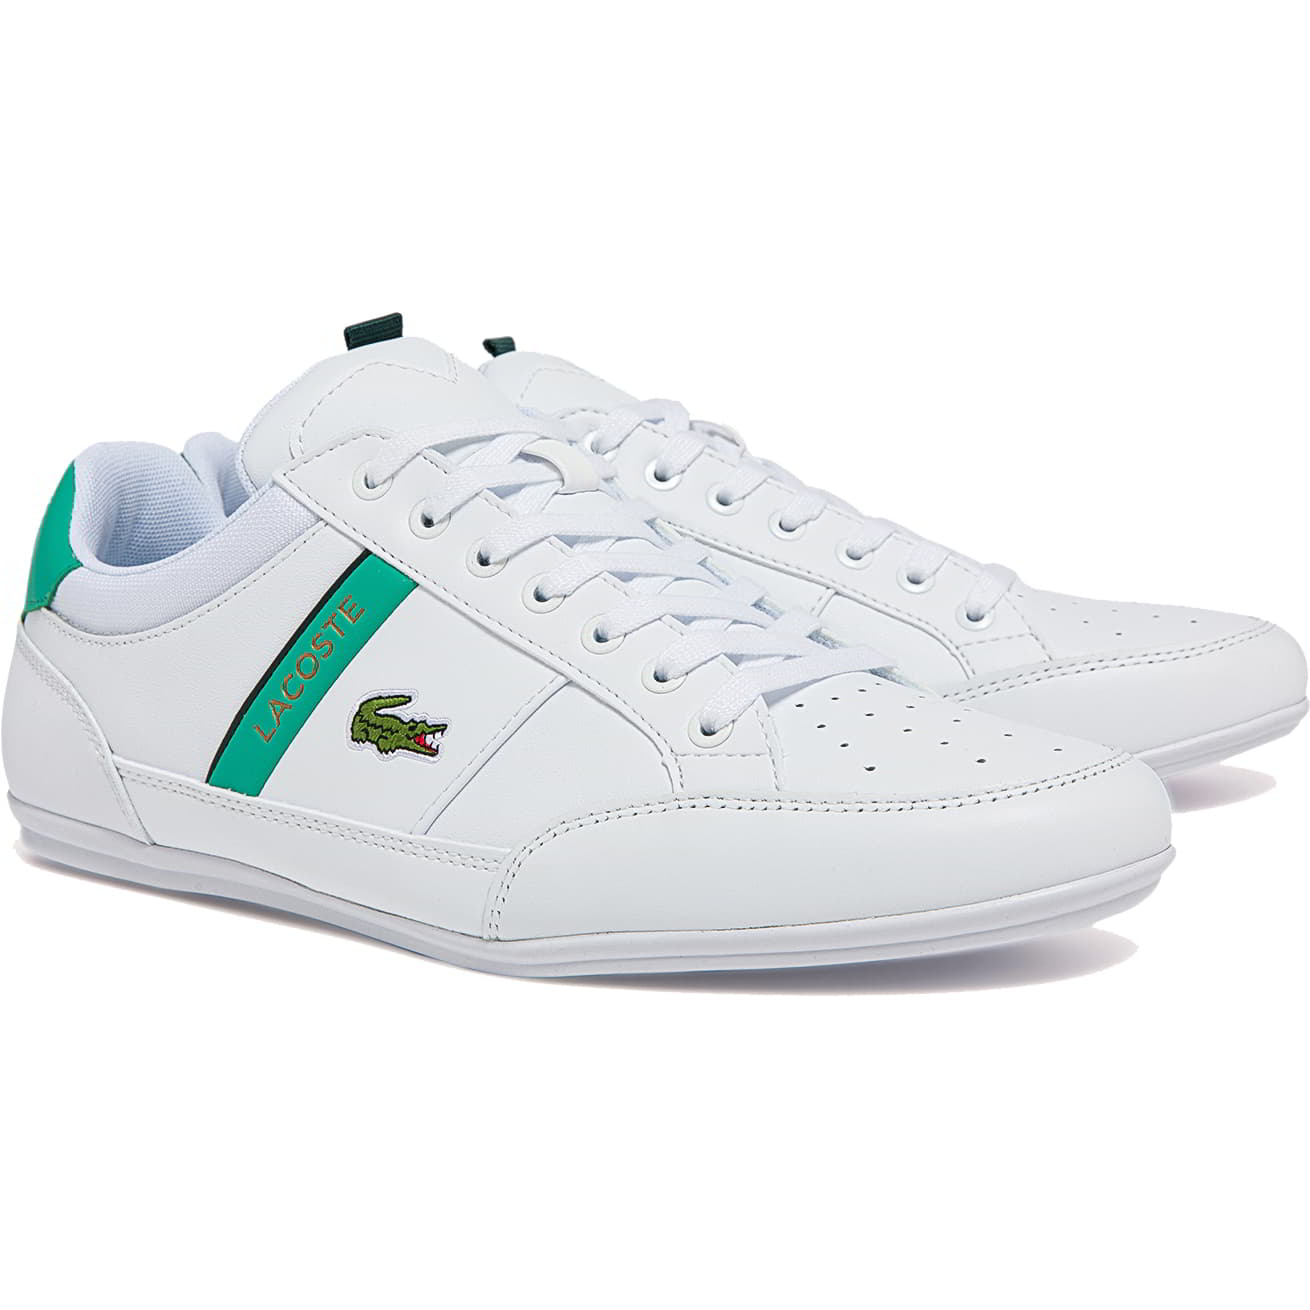 Lacoste Mens Chaymon 722-1 Leather Trainers - UK 8.5 White 2951